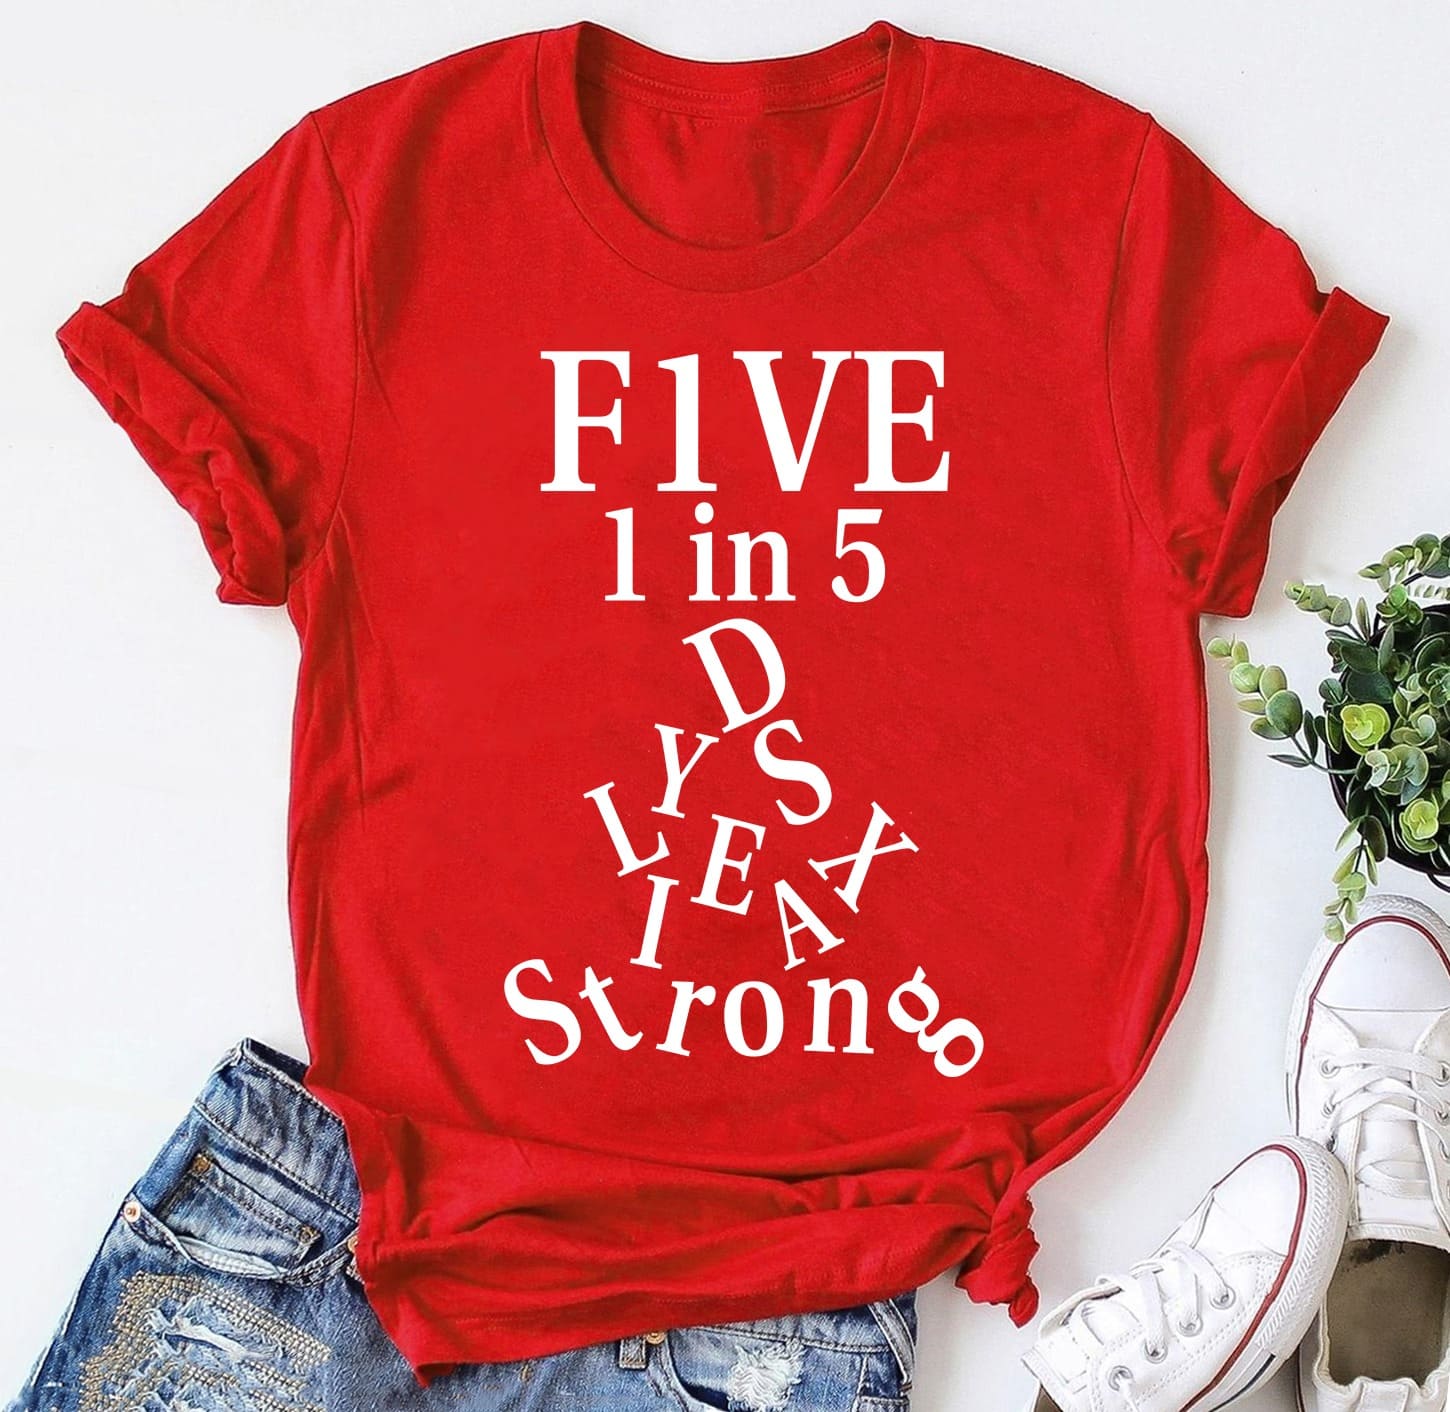 Five 1 in 5 Dyslexia Strong